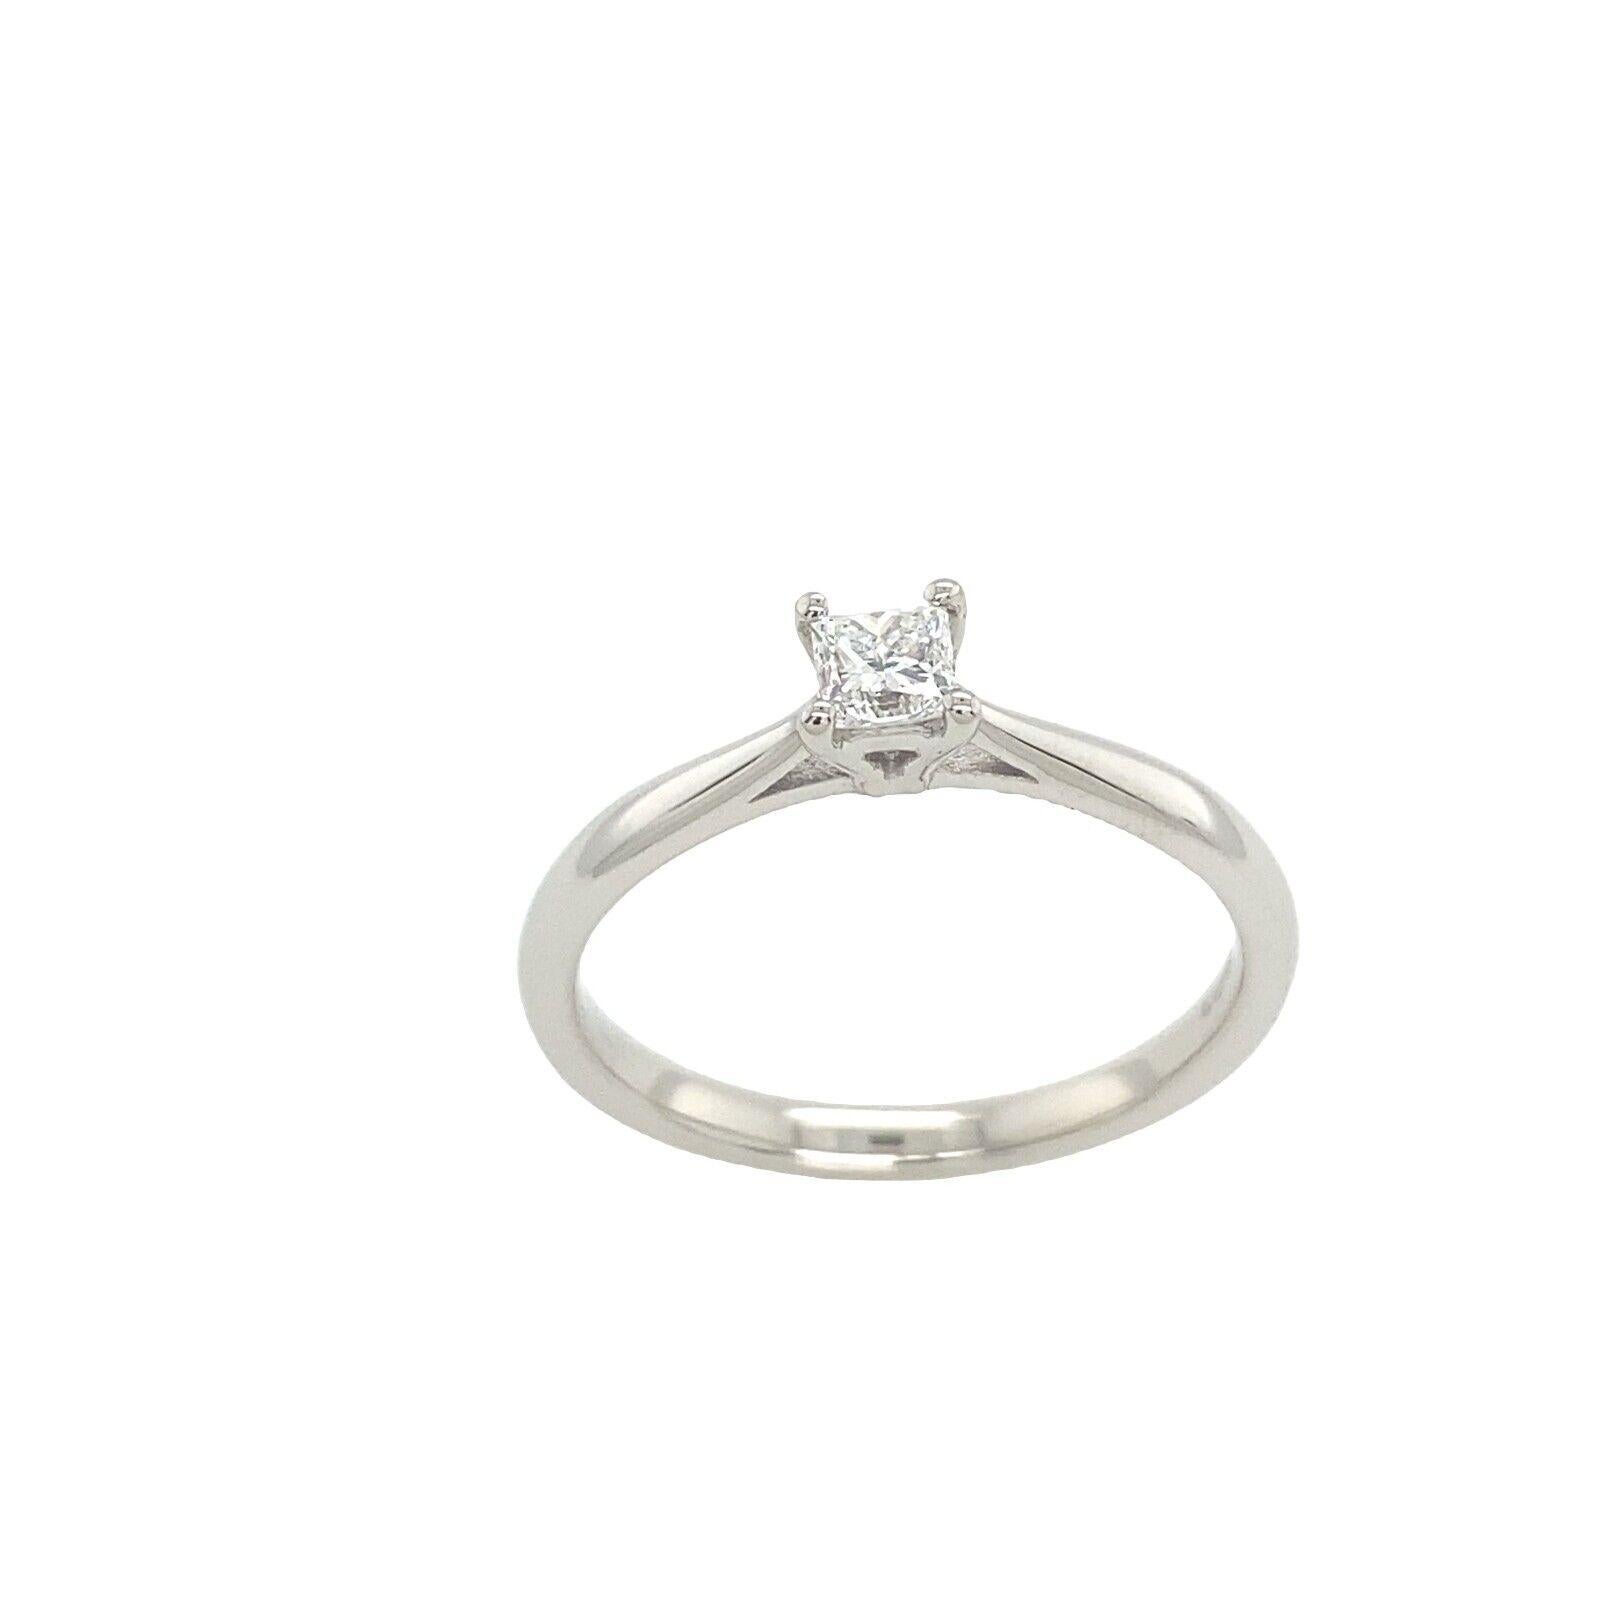 This diamond engagement ring features a 0.25ct princess cut diamond set in a platinum. The ring is certified by Beaverbrooks.

Additional Information:
Total Diamond Weight: 0.25ct
Diamond Colour: G
Diamond Clarity: SI1
Width of Band: 2.13mm
Width of